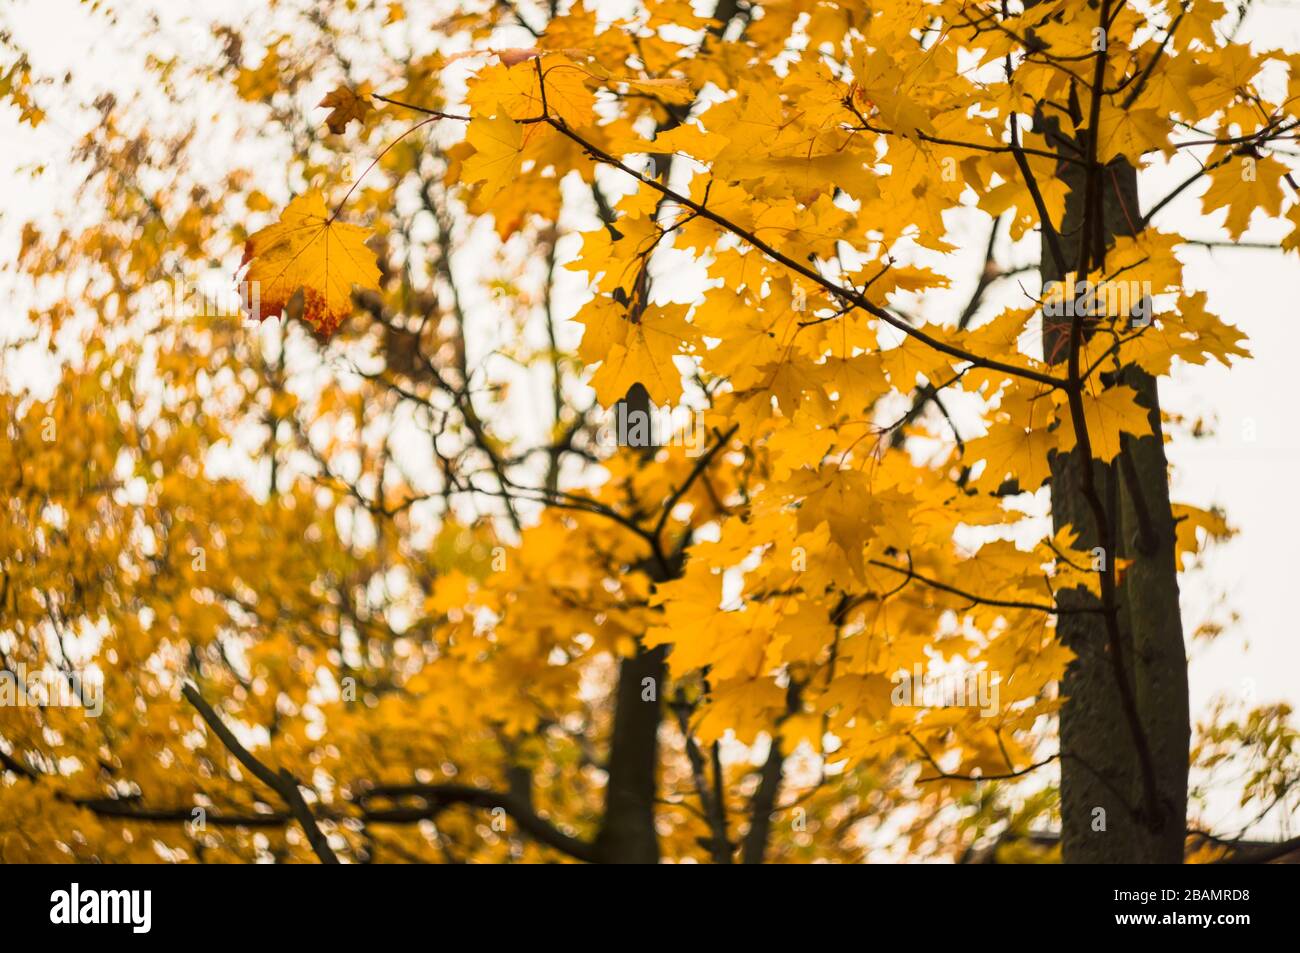 Yellow maple leaves on a blurred background. Autumn background. Soft focus, defocused Stock Photo